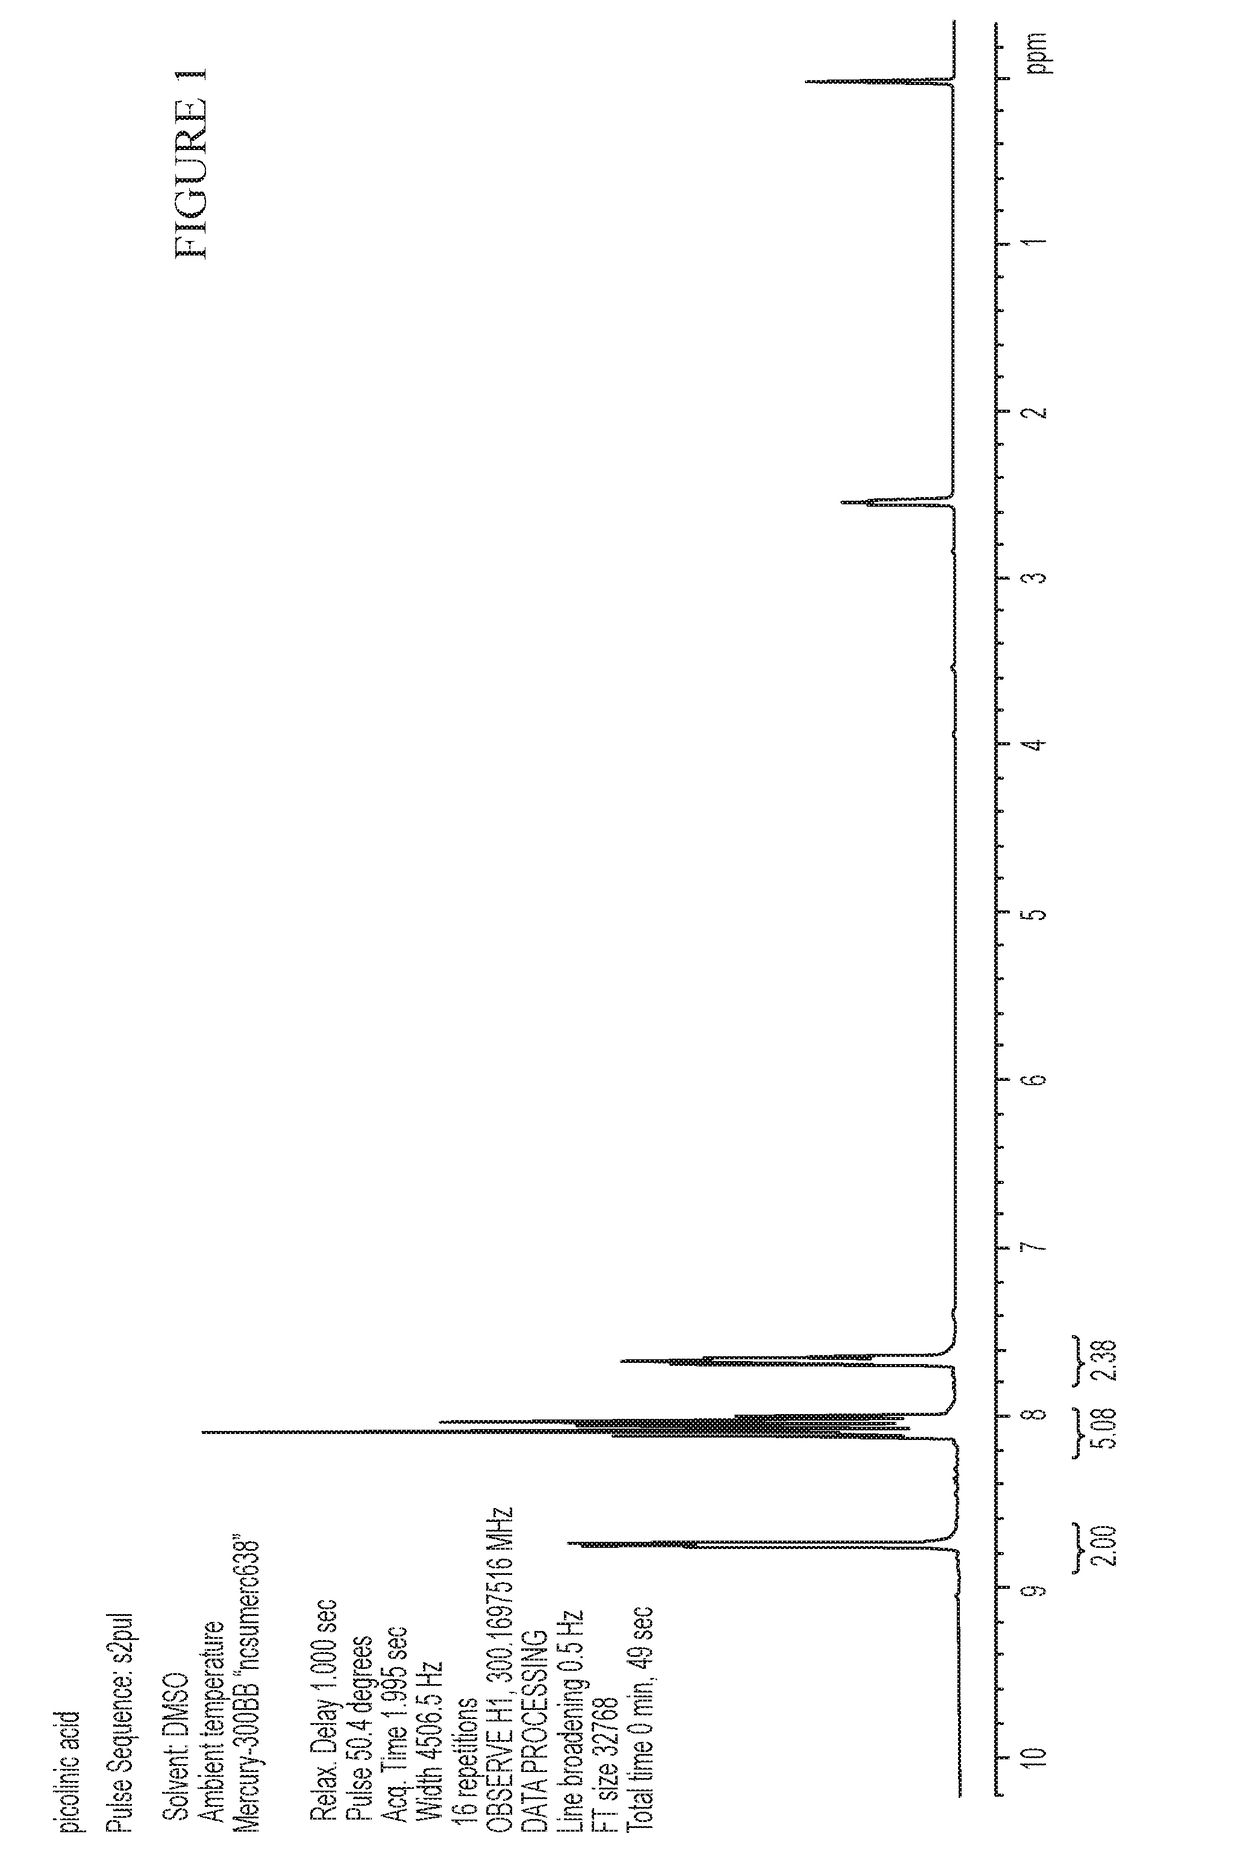 Magnesium picolinate compositions and methods of use